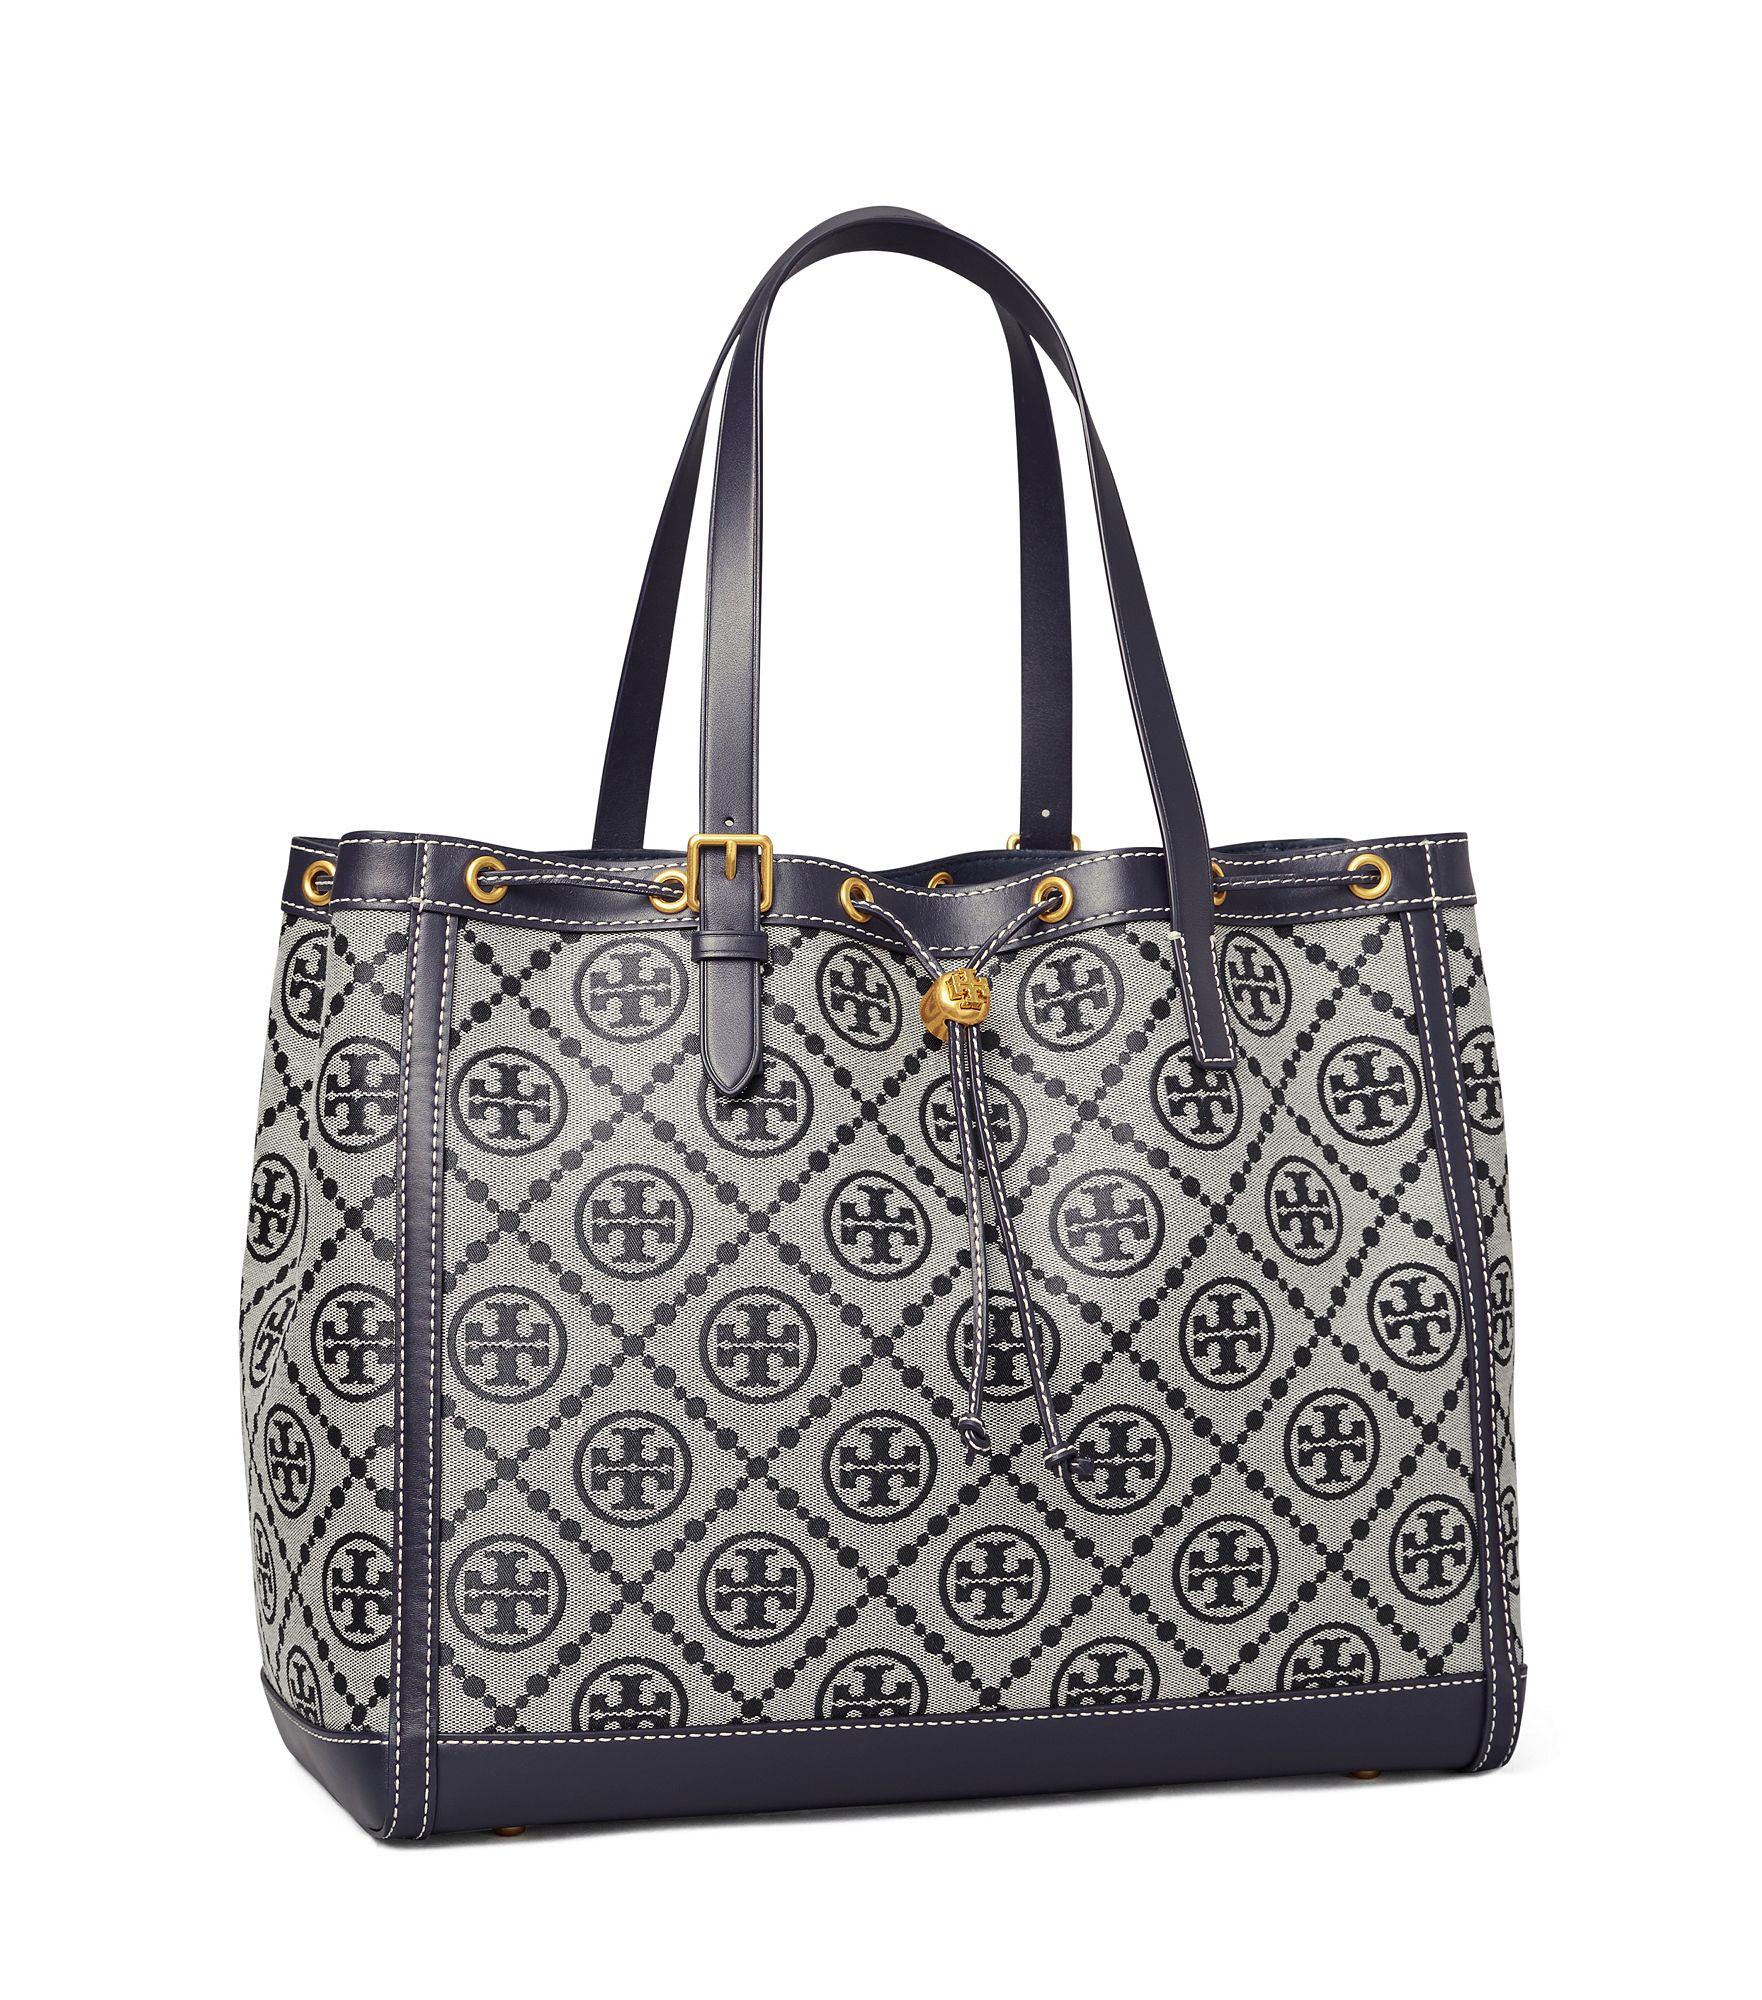 Tory Burch Leather T Monogram Jacquard Tote Bag in Navy Blue (Blue 